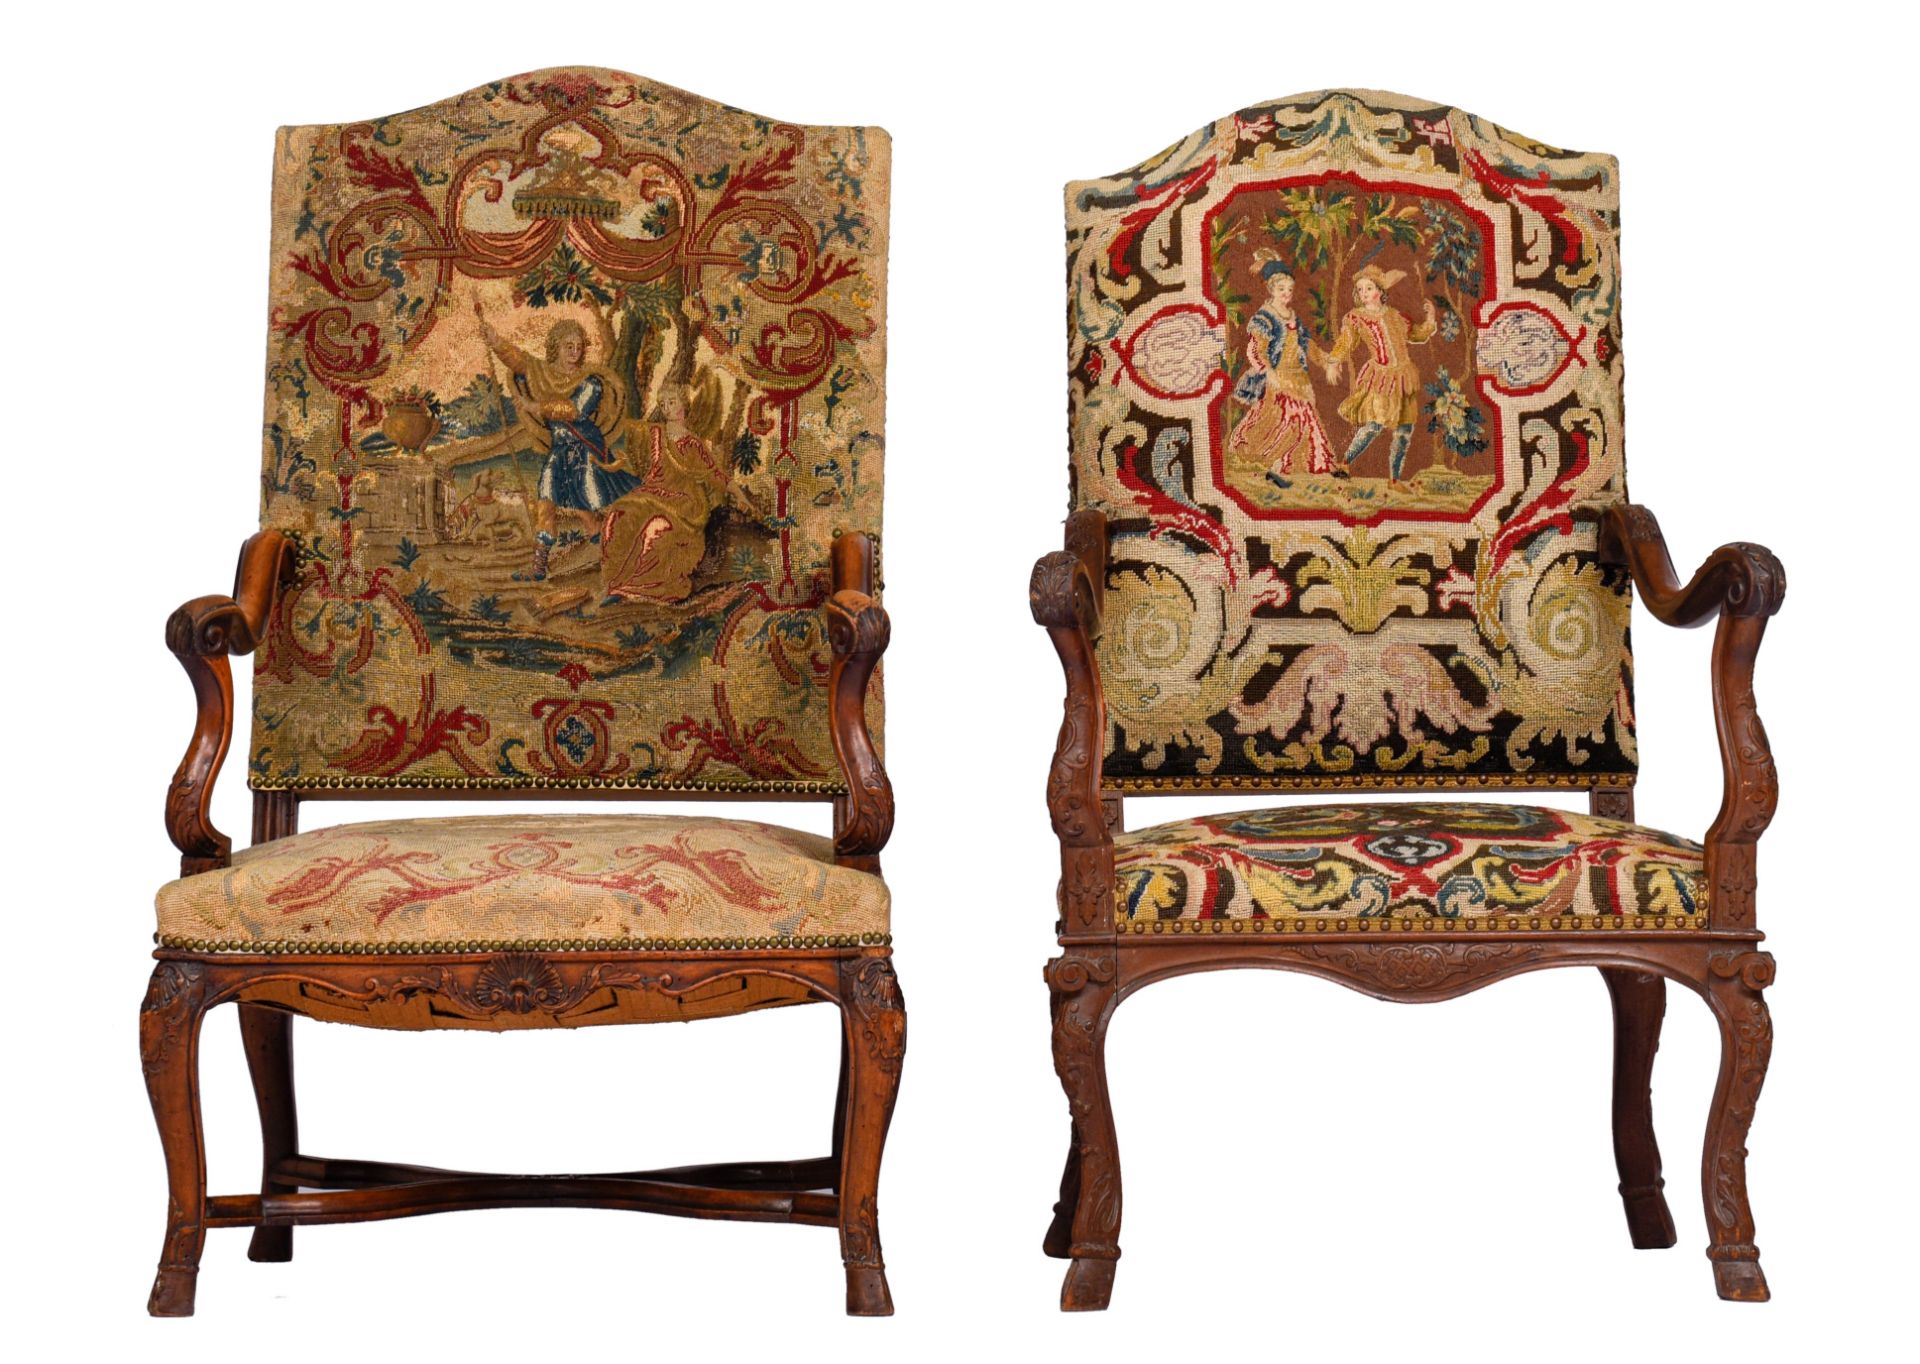 Two carved walnut Régence armchairs, H 120 - W 71 - H 116 - W 70 cm - Image 3 of 24